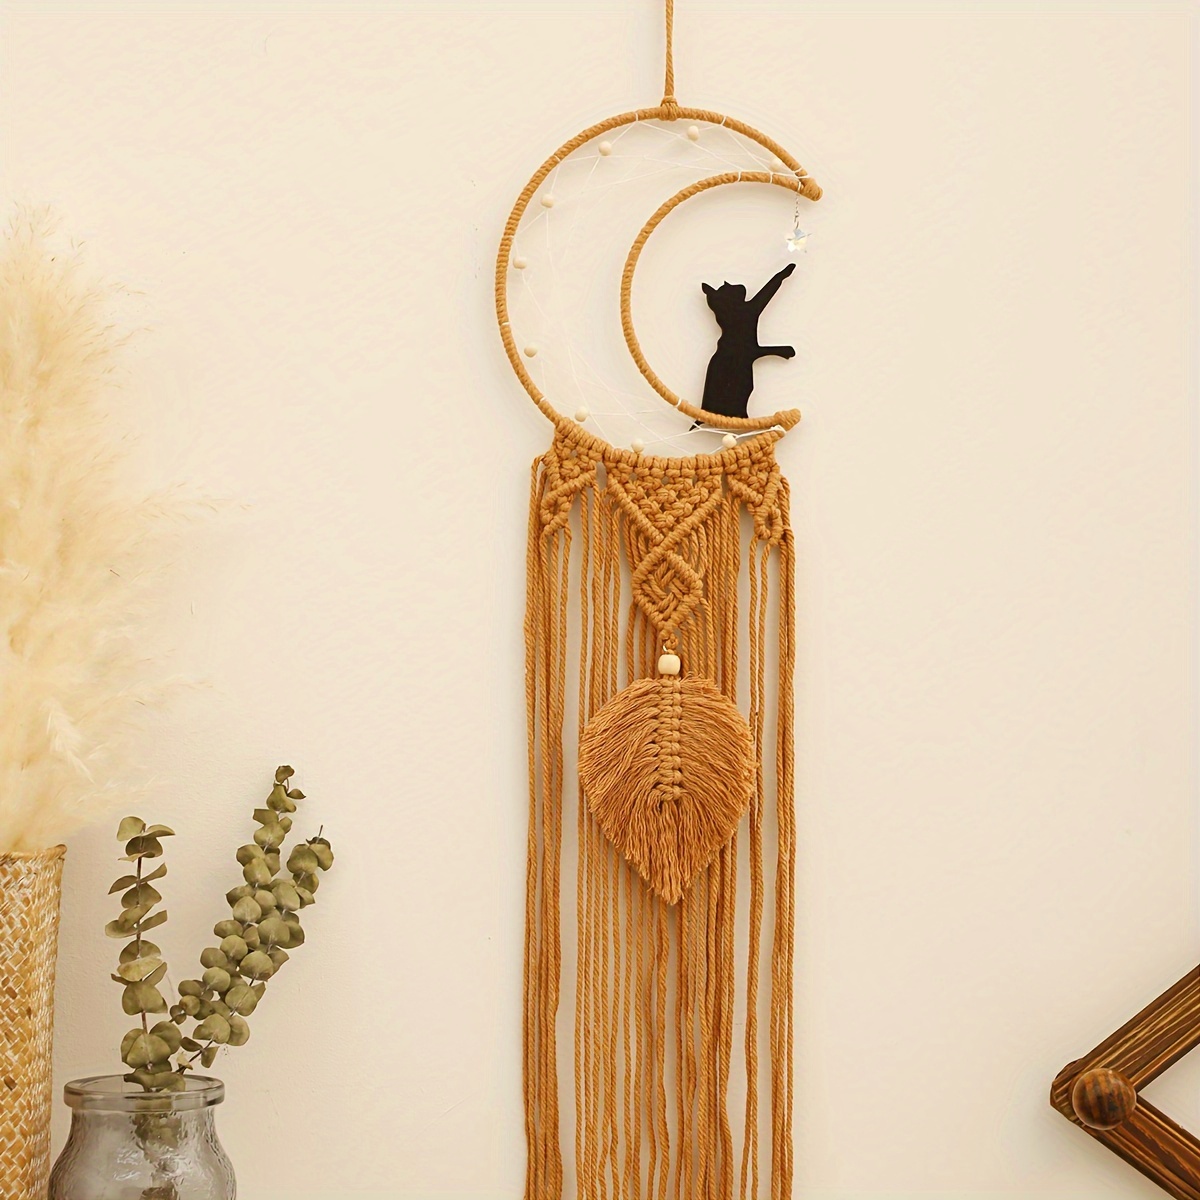  Homecor Gifts for Teenage Girls, Hanging Photo Display & Moon  Dream Catchers, Christmas Teen Girls Gifts Ideas Ages 10 11 12 13 14 Years  Old, Macrame Wall Decor Boho Bedroom Dorm